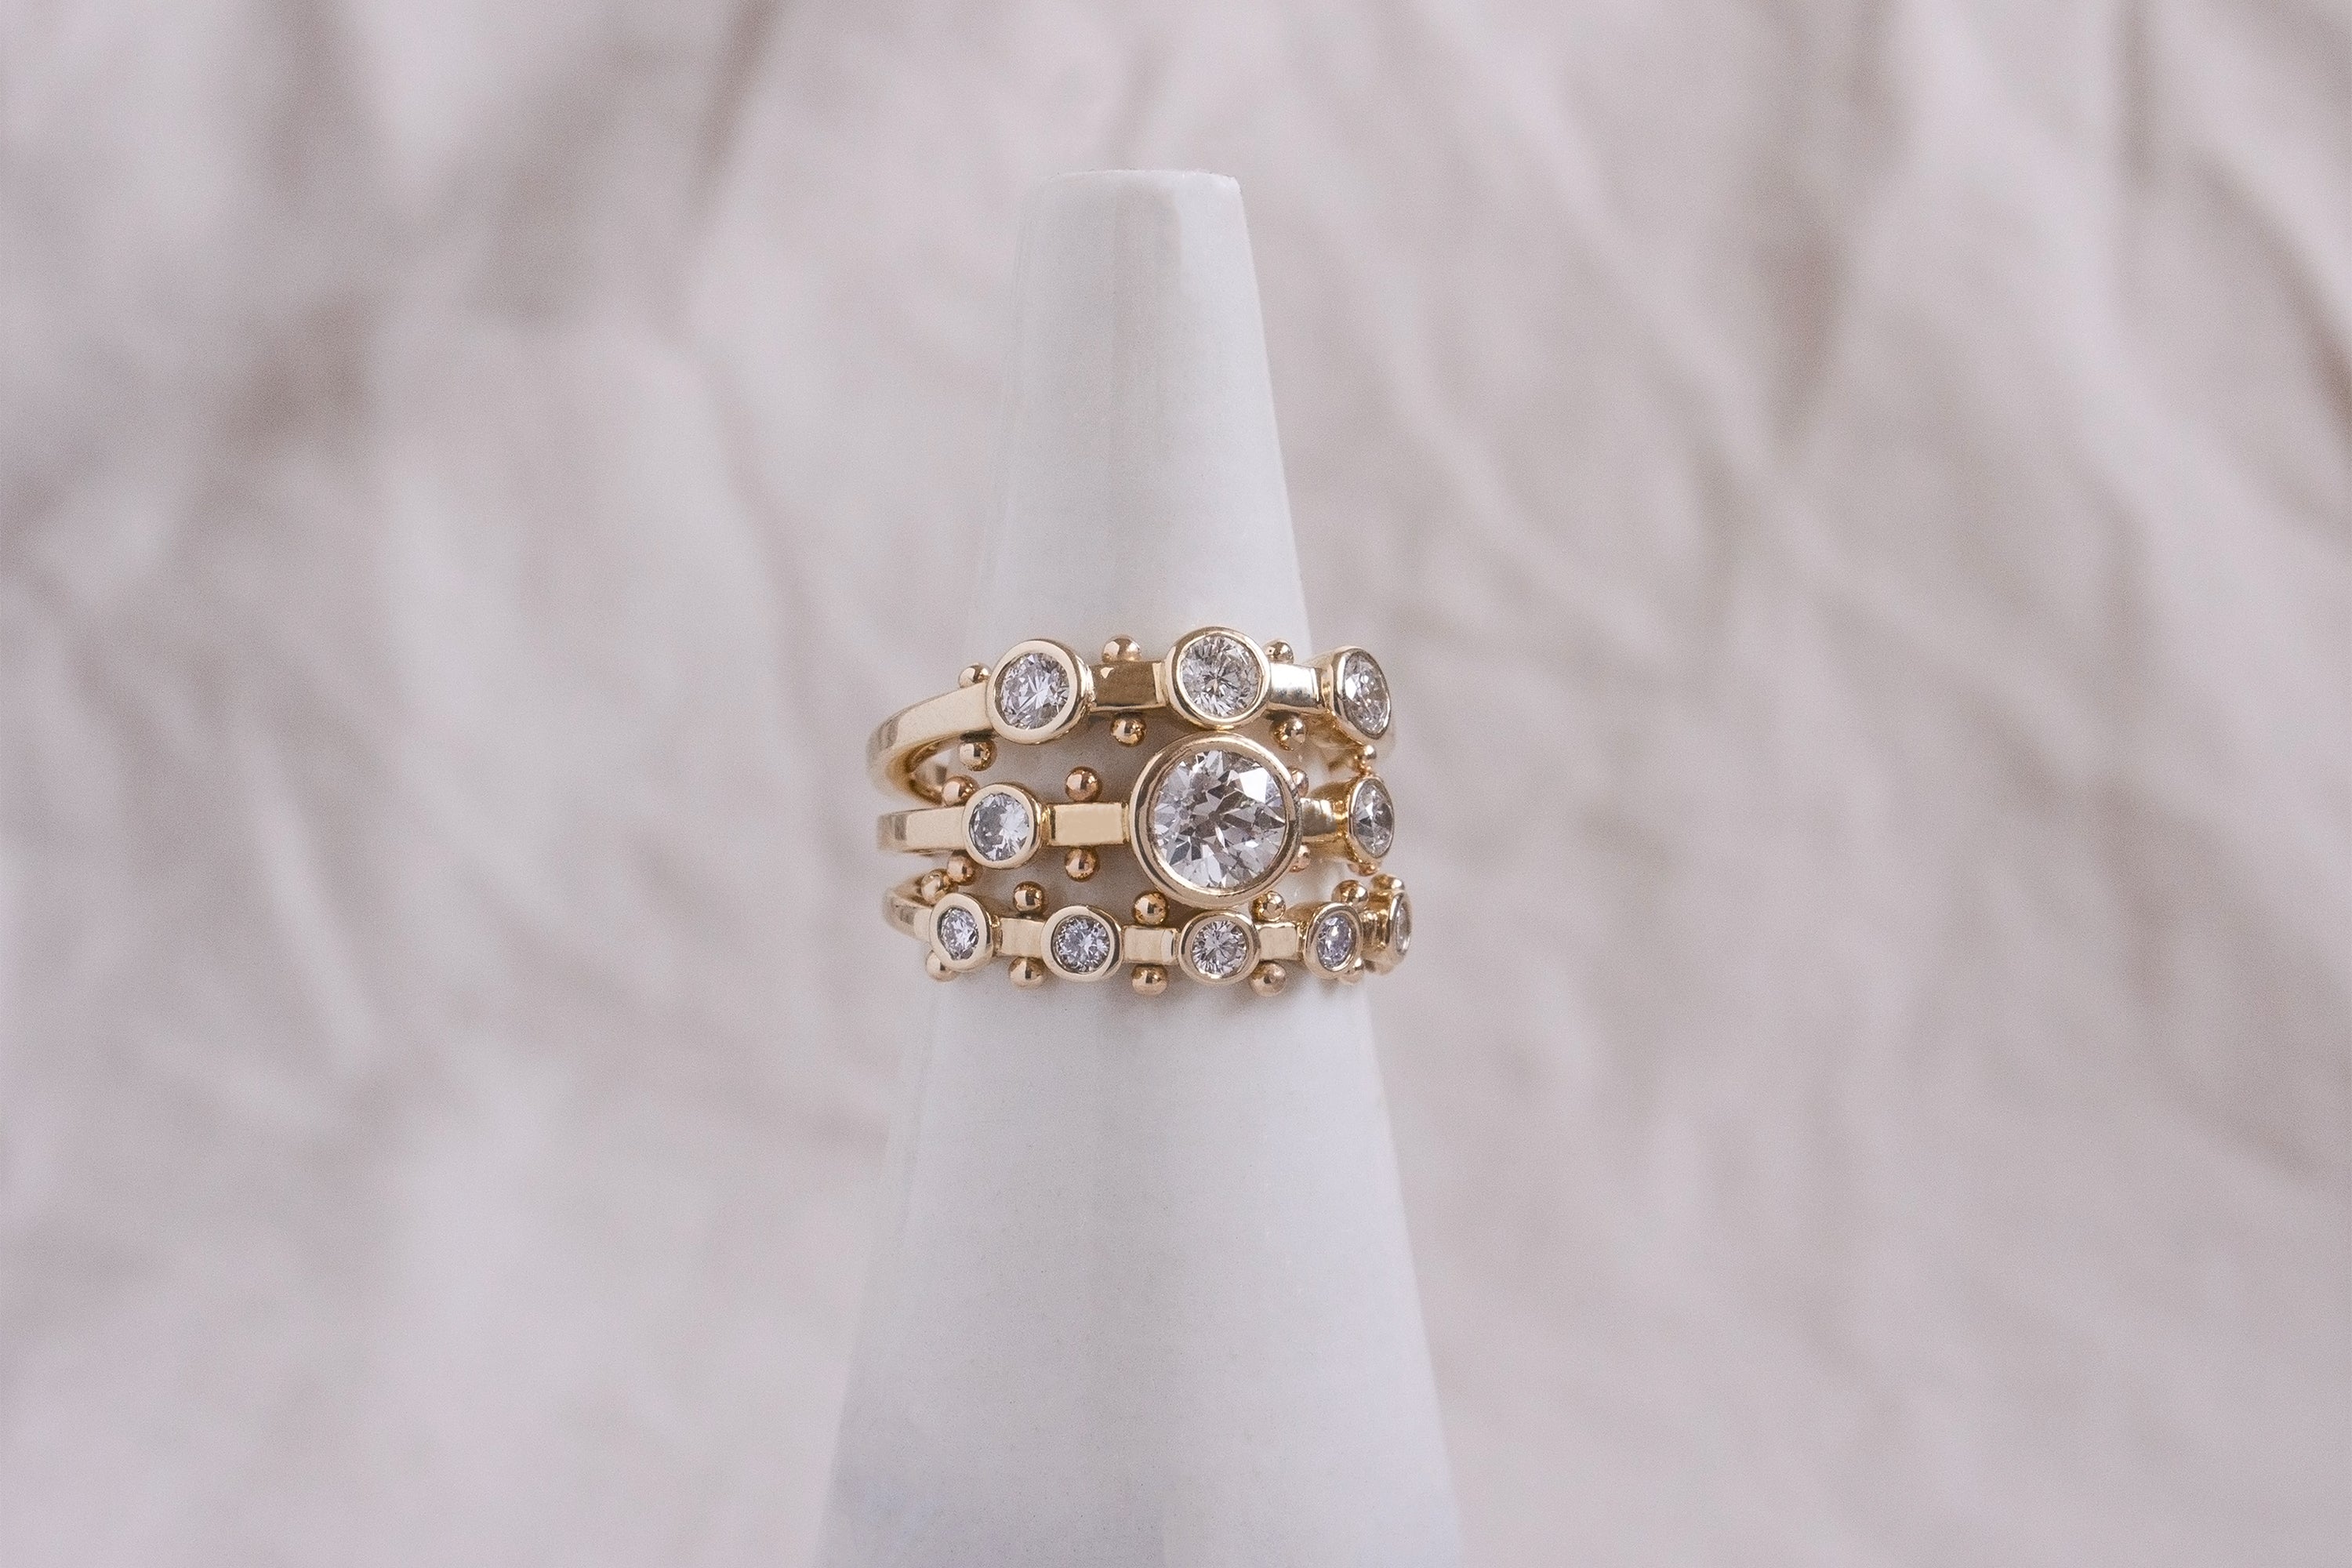 A close up view of a ring stack featuring the 3-stone, Crown Kaori, and 5-stone white diamond Koemi rings all with gold balls between each diamond setting along the sides of the band against a white background. 